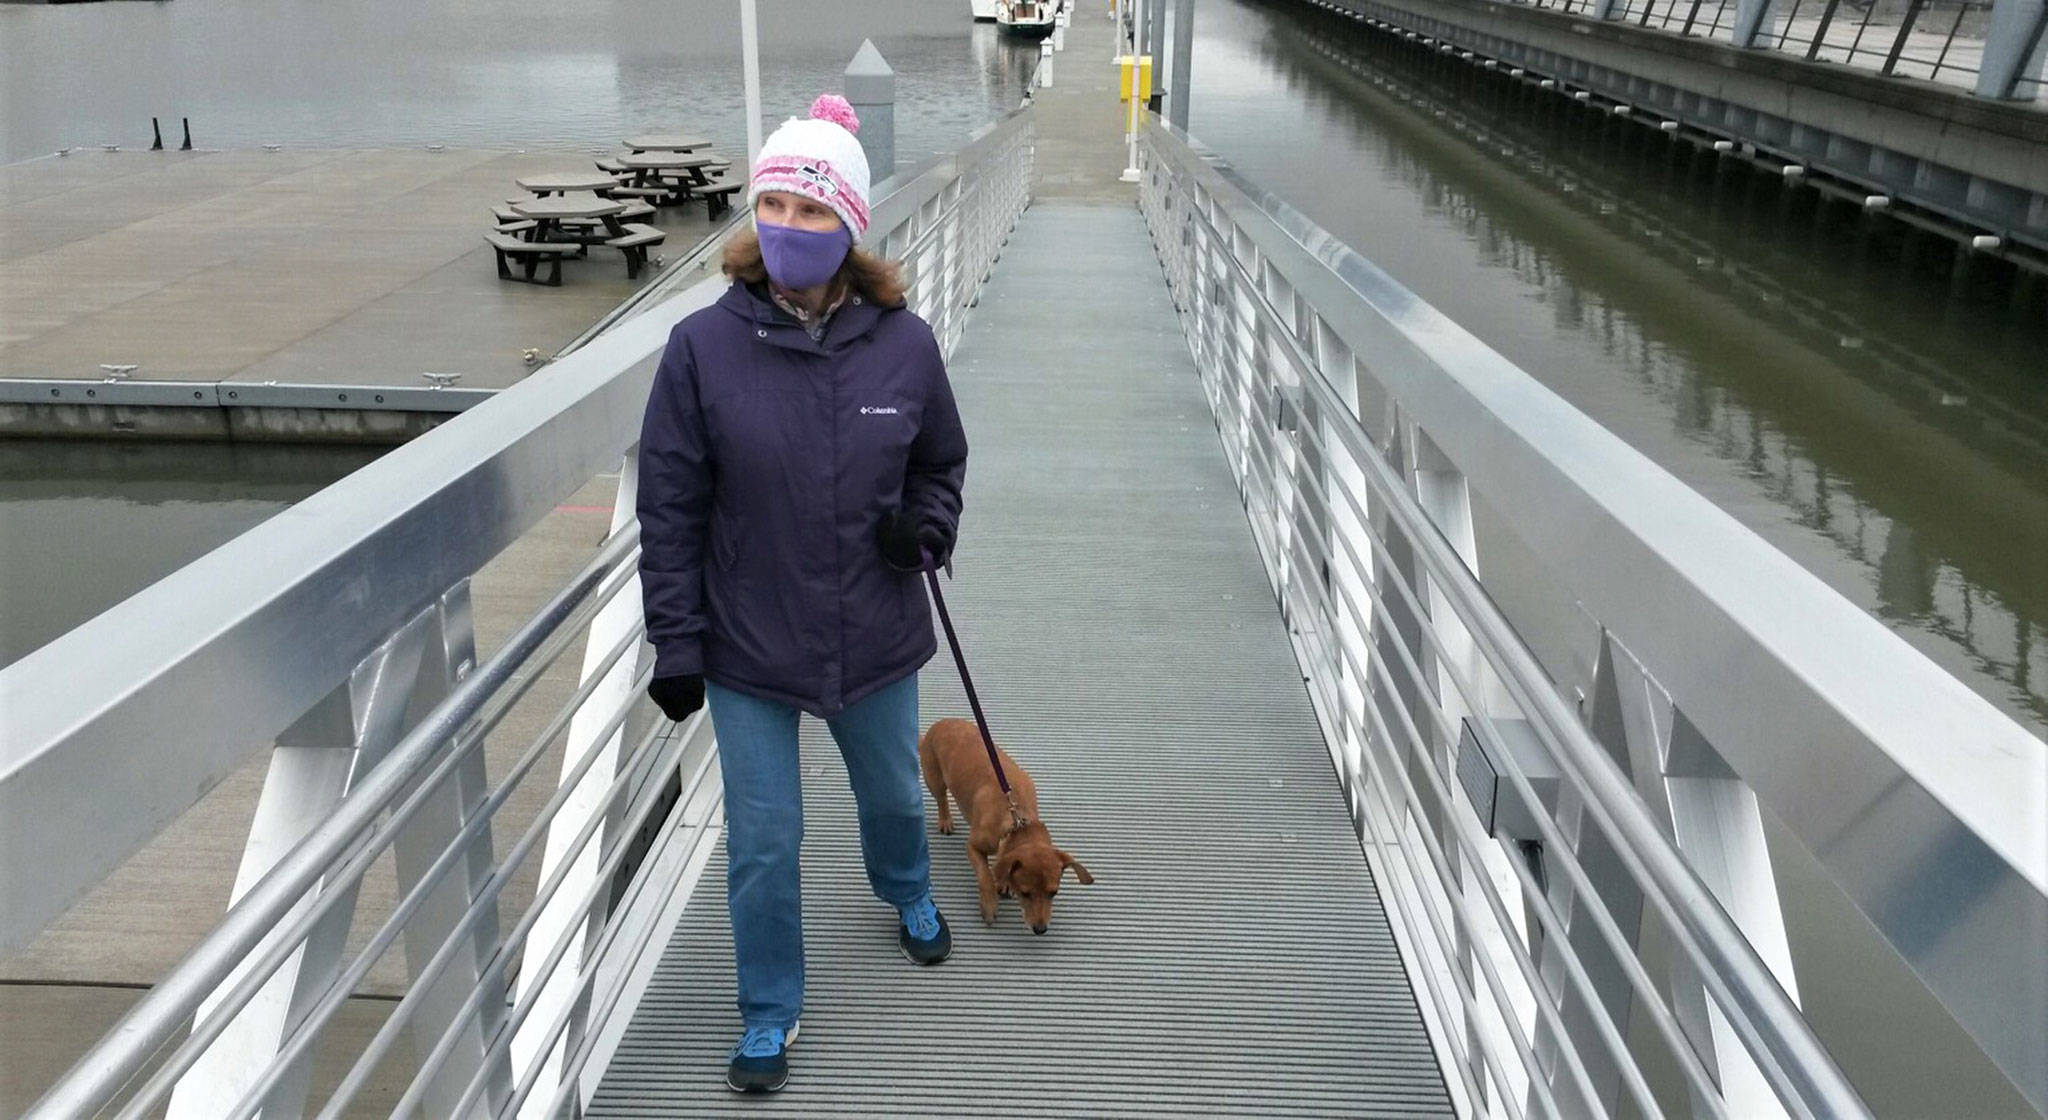 Julie Muhlstein and her dog, Oscar, out for a walk last week at the Everett waterfront. (Contributed photo)